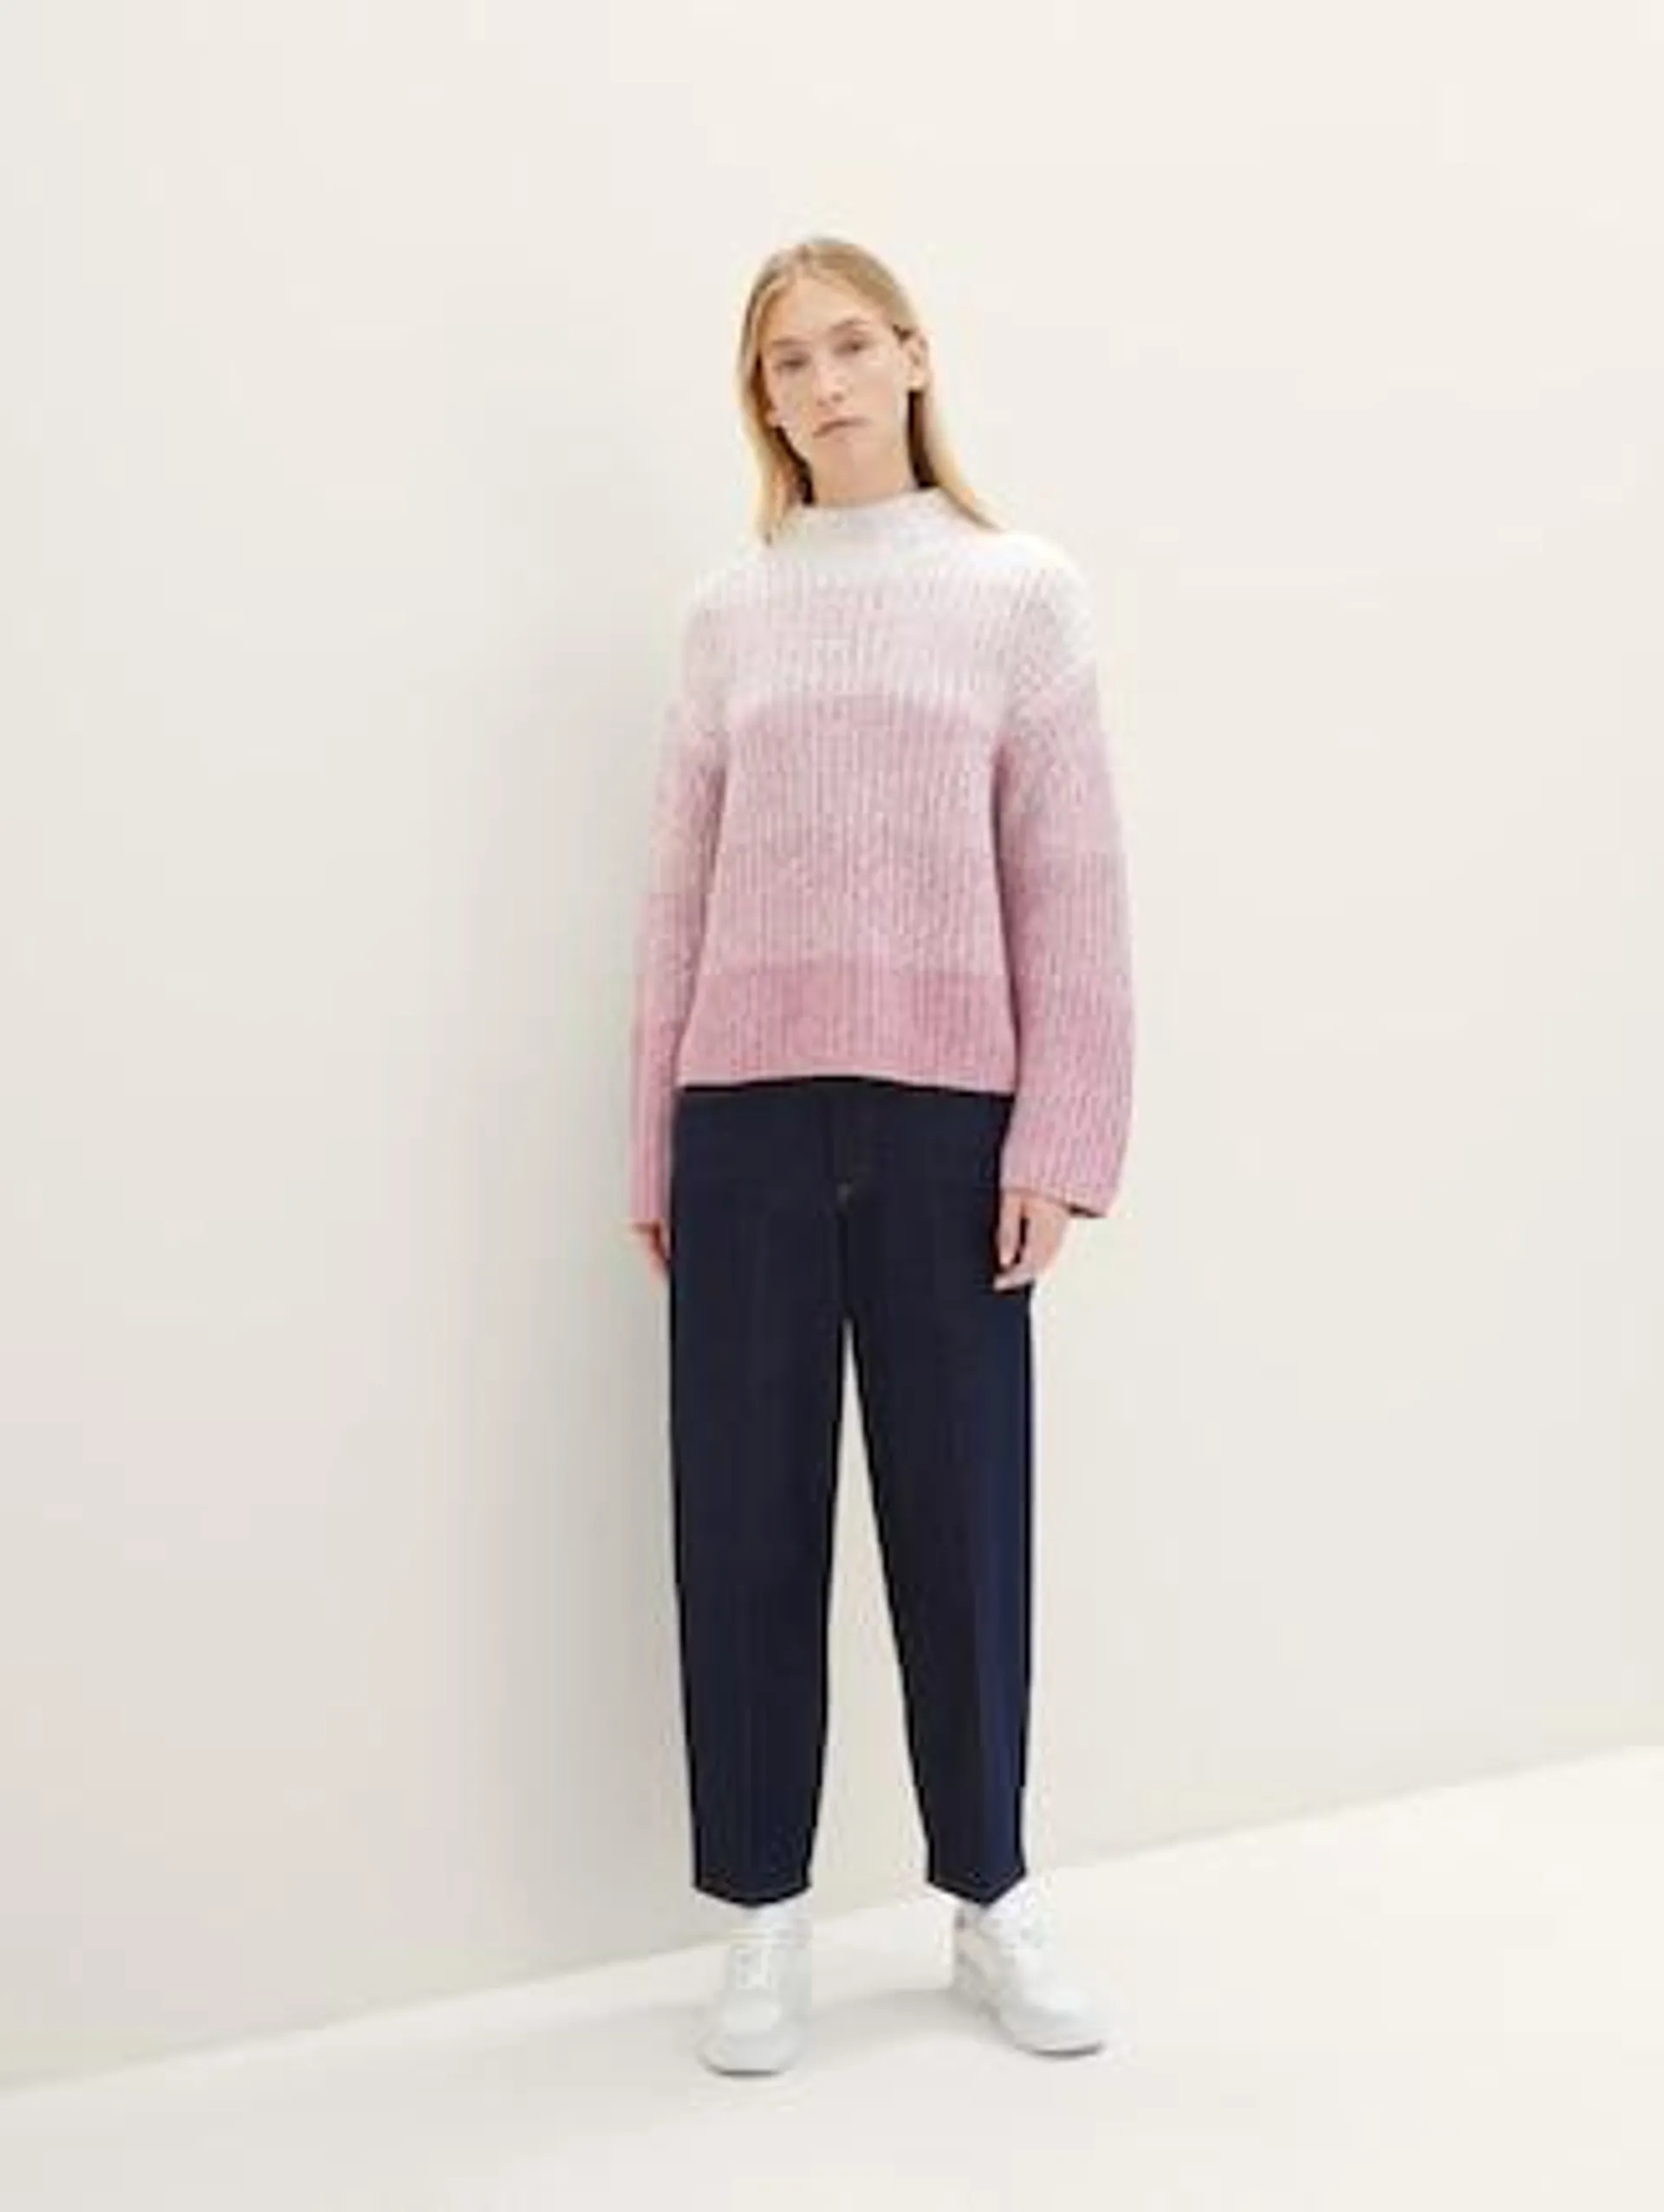 Knitted sweater with colour gradients